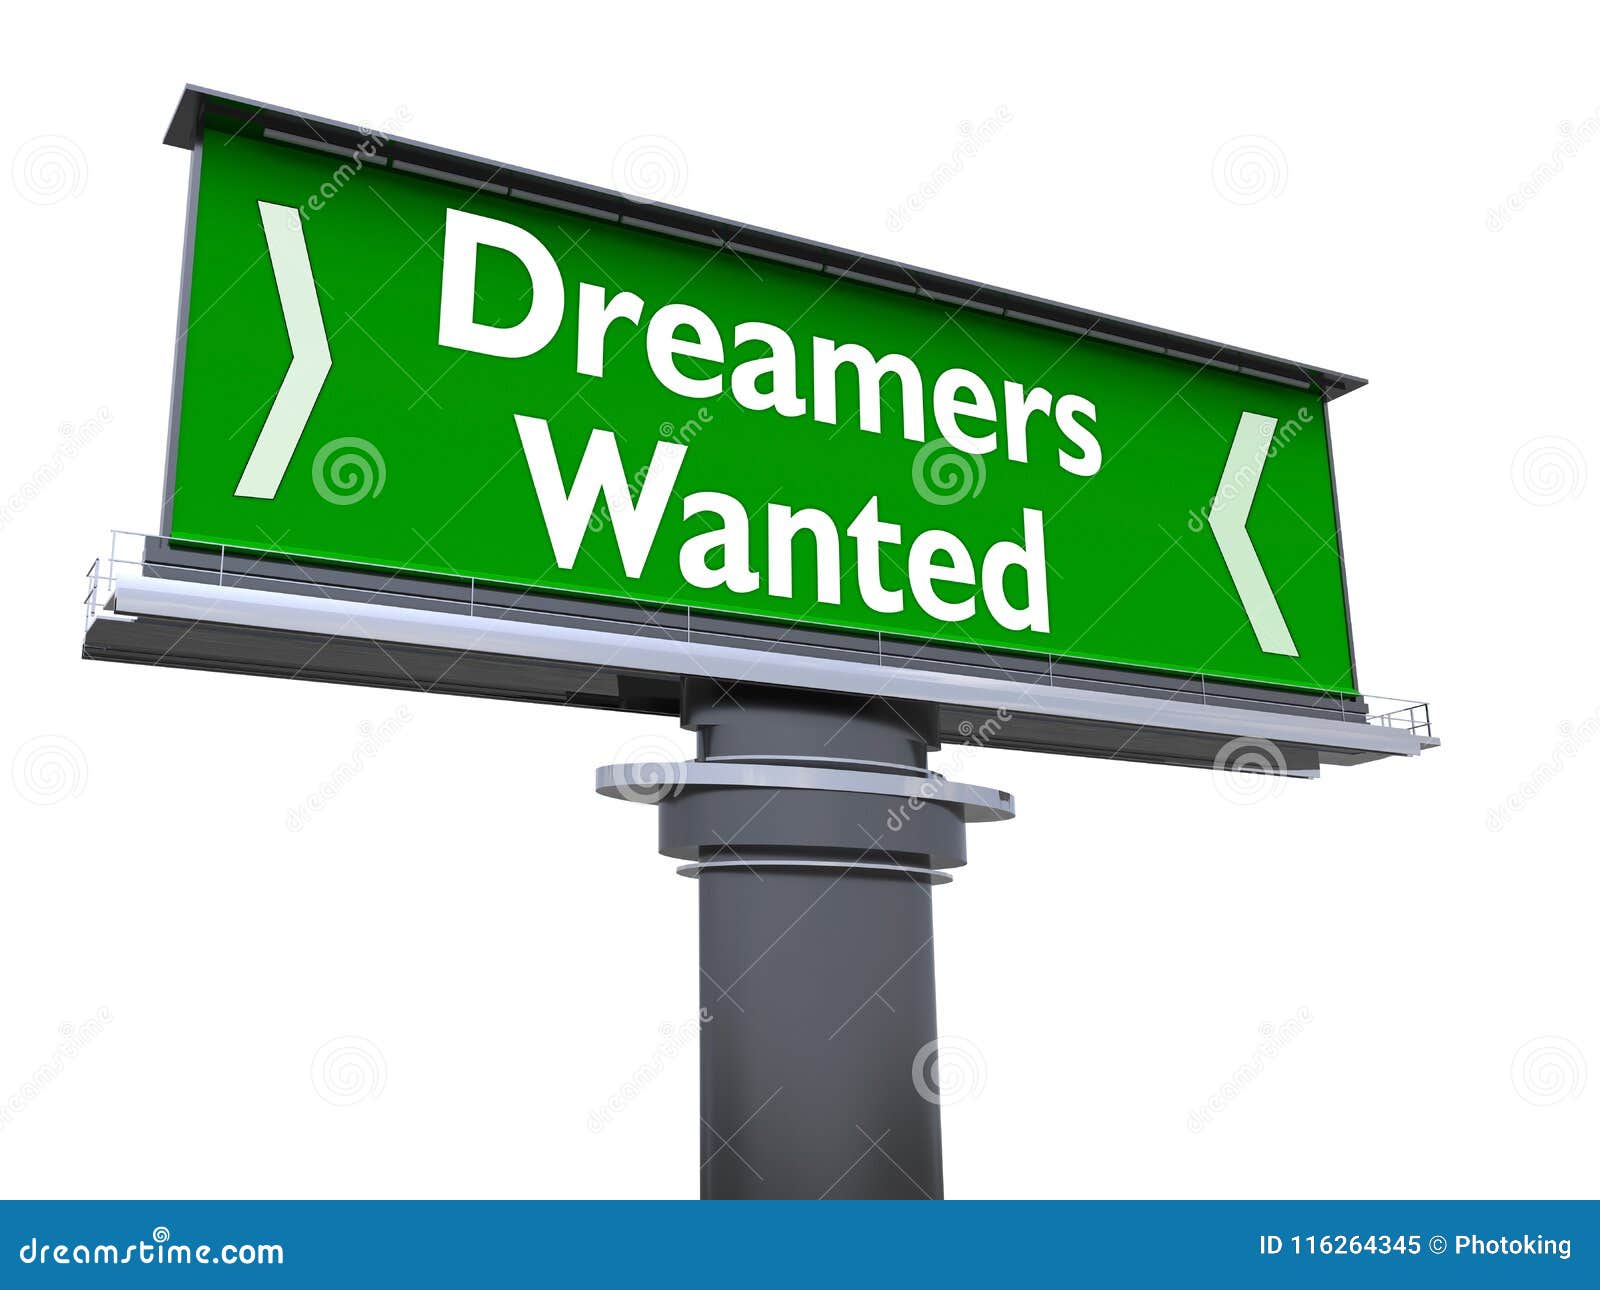 dreamers wanted